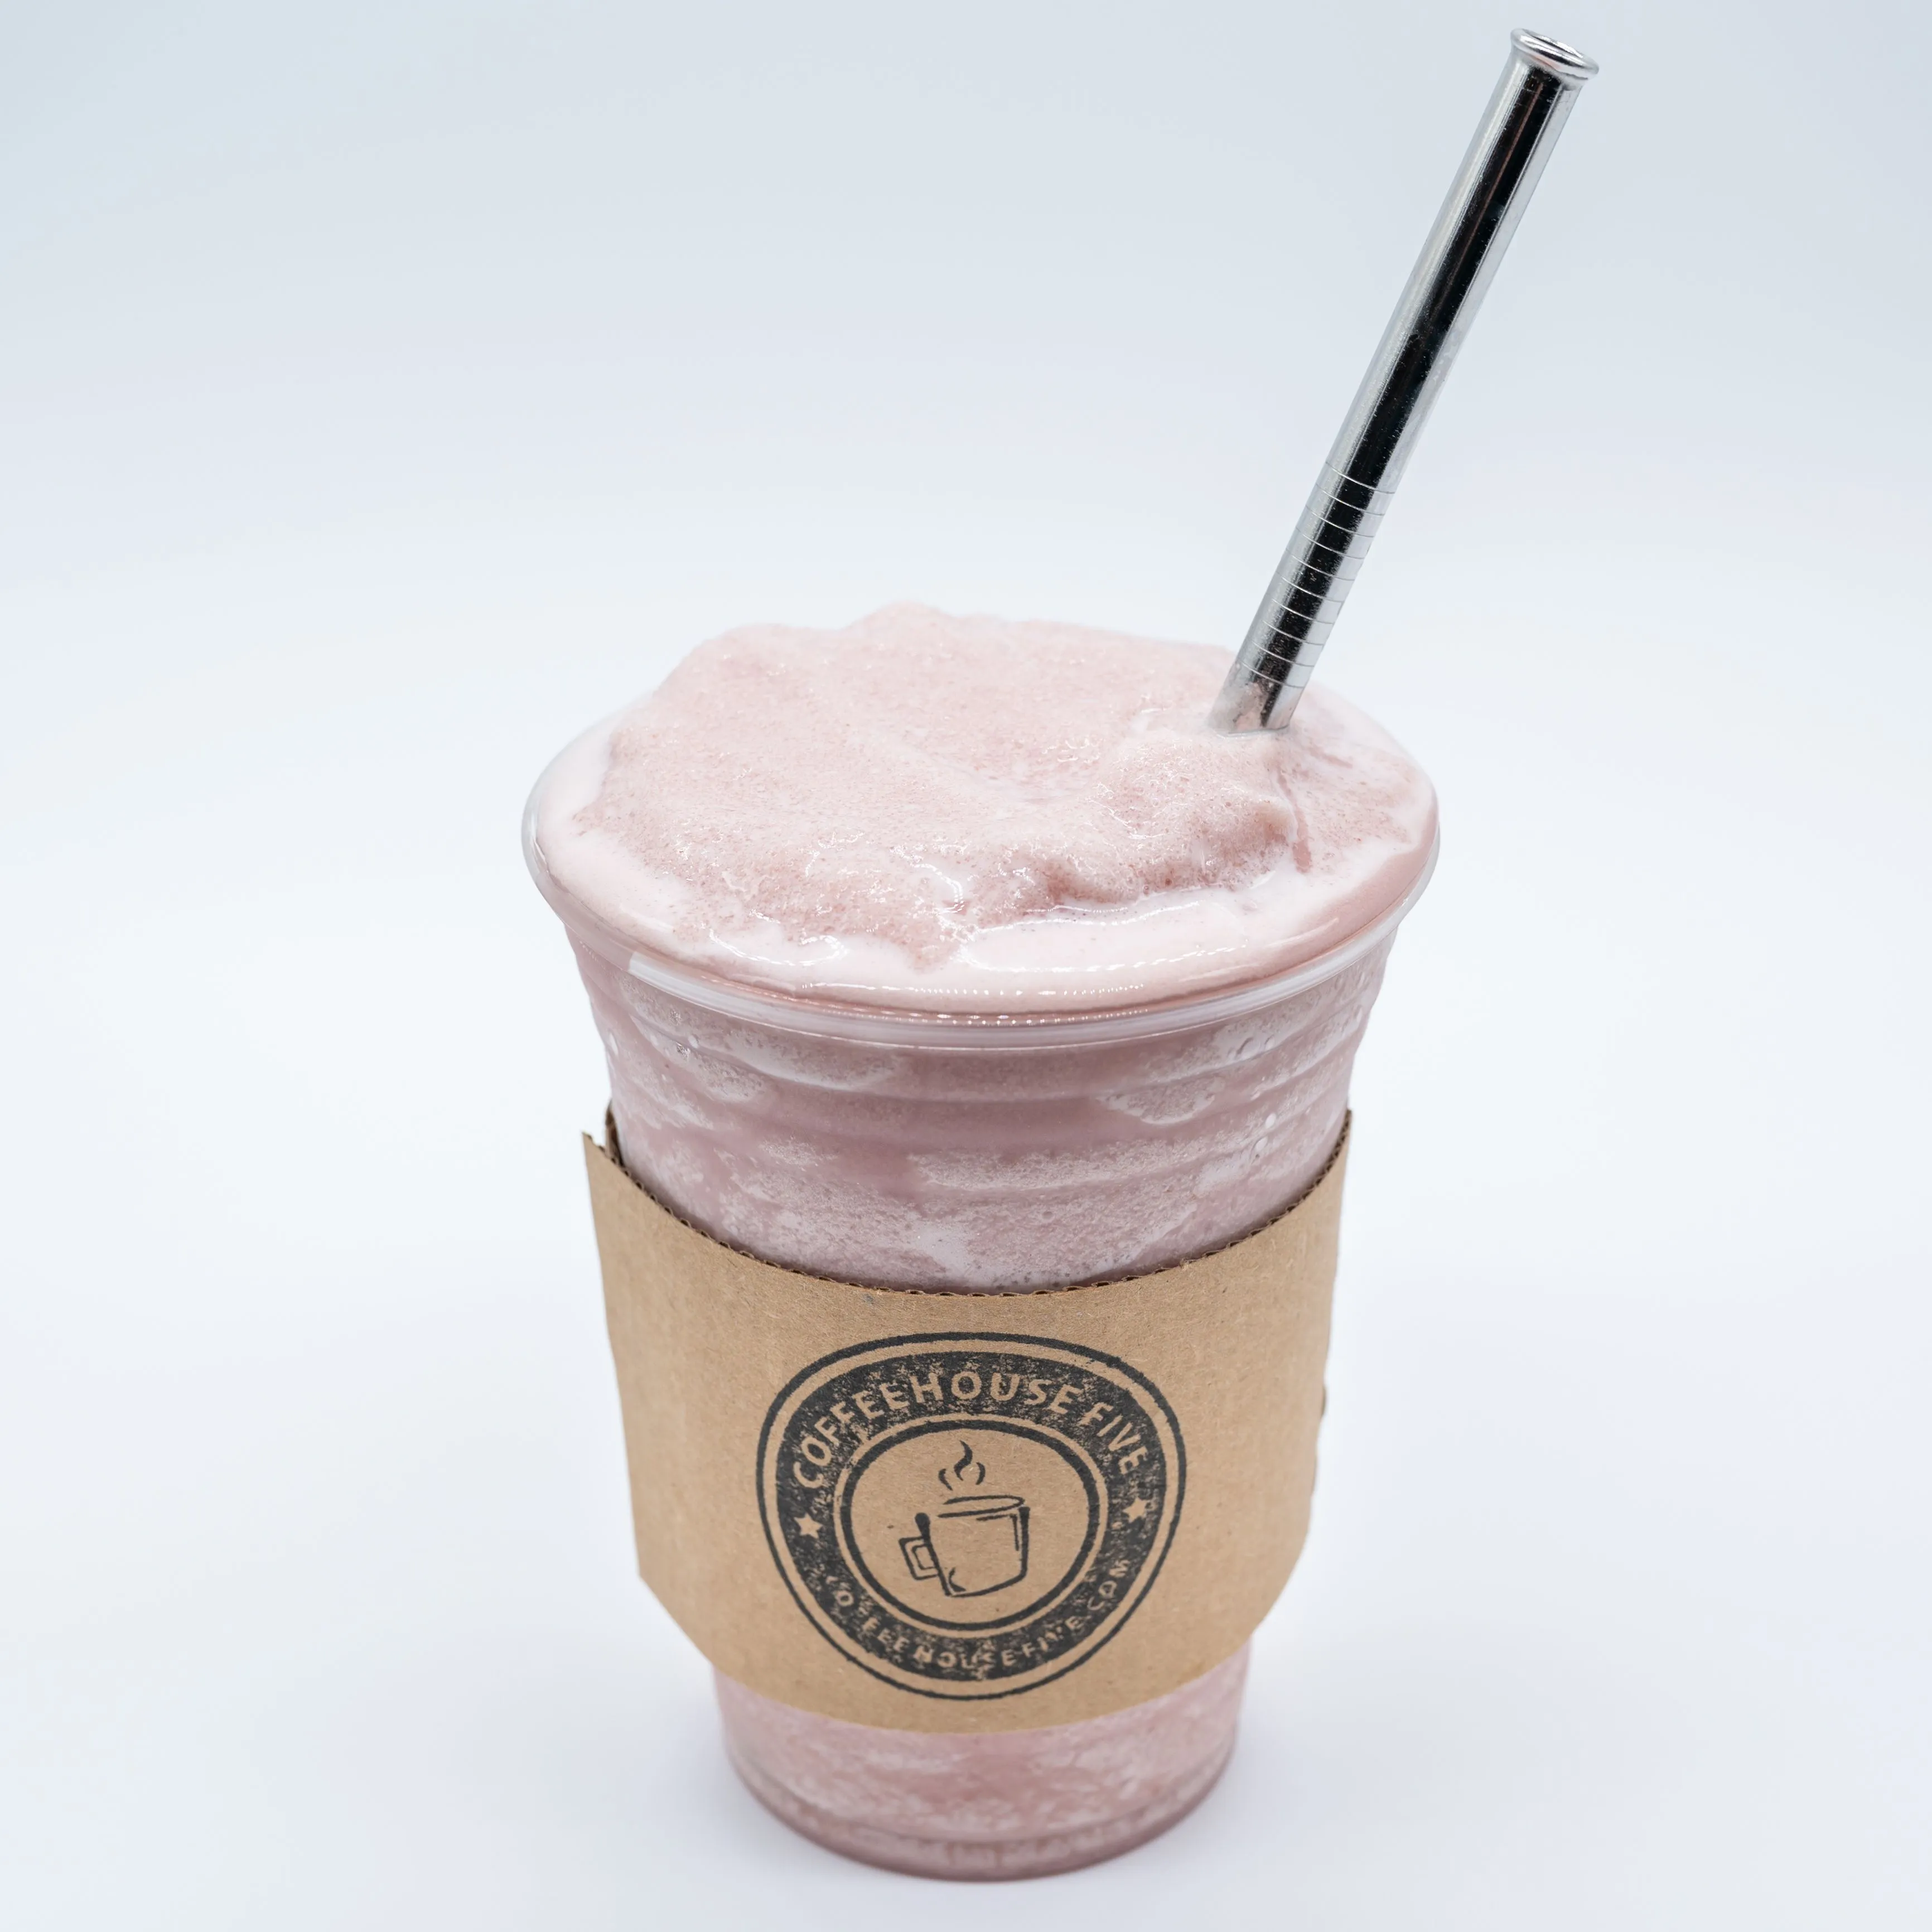 A frothy pink smoothie in a clear plastic cup with a cardboard sleeve and a metal straw, set against a white background.